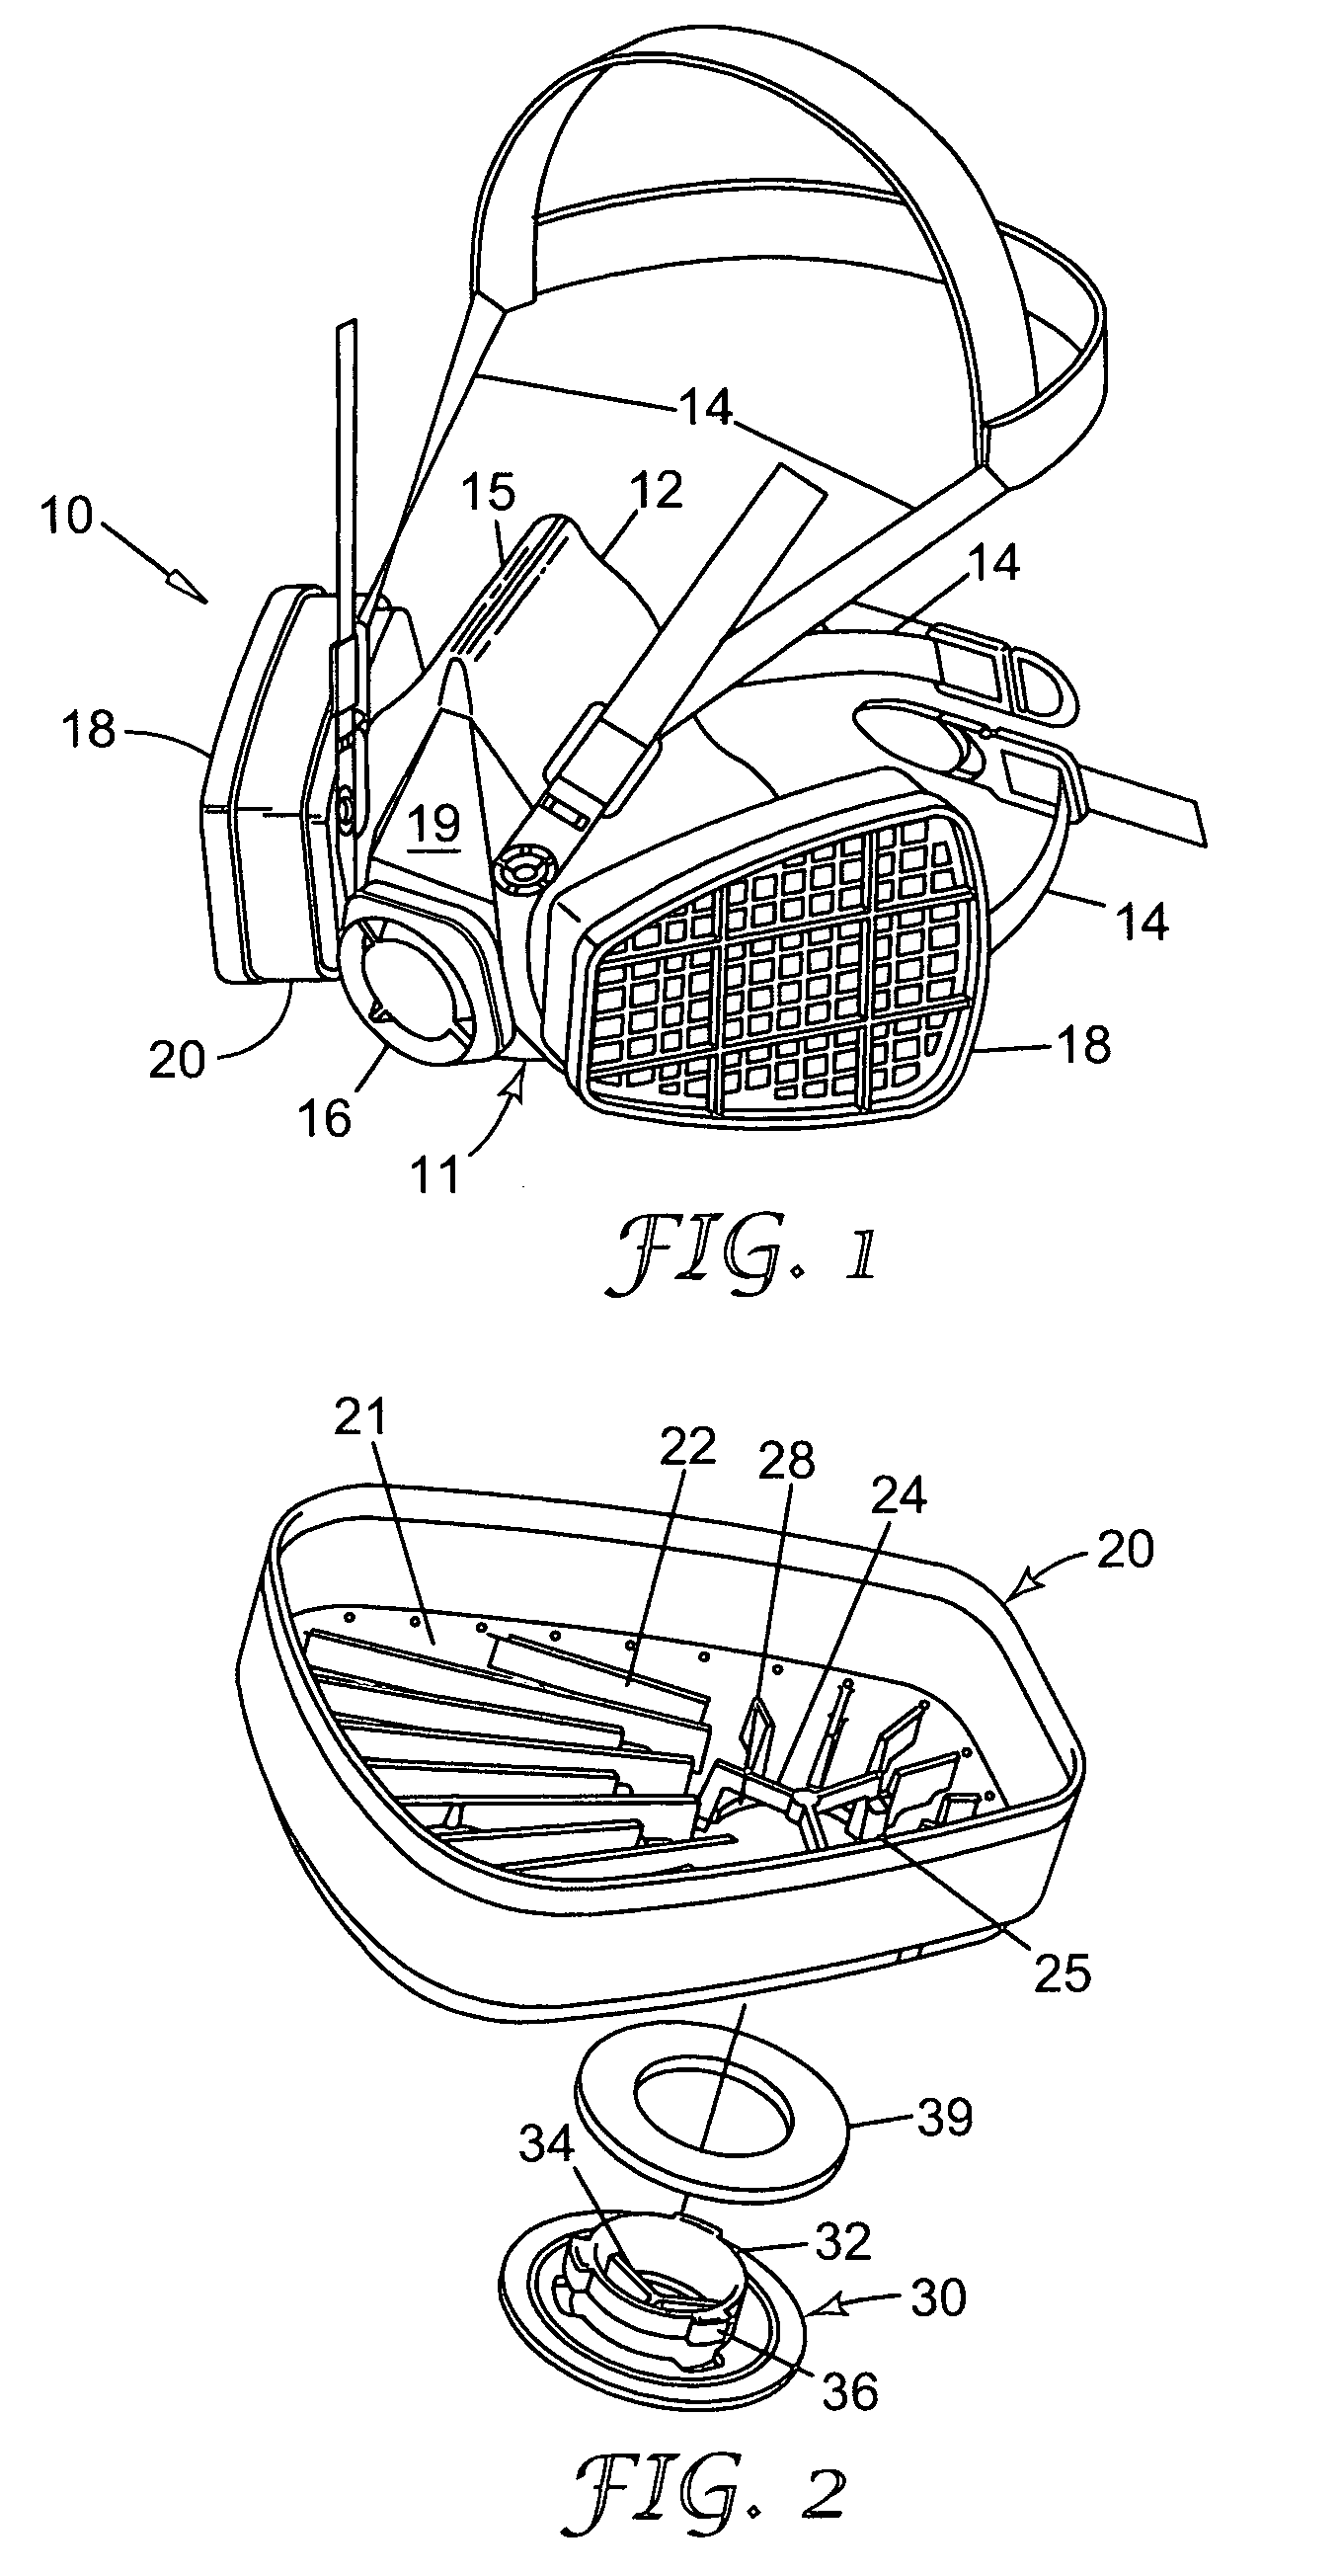 Personal respiratory protection device that has a permanent or semi-permanent bayonet connection